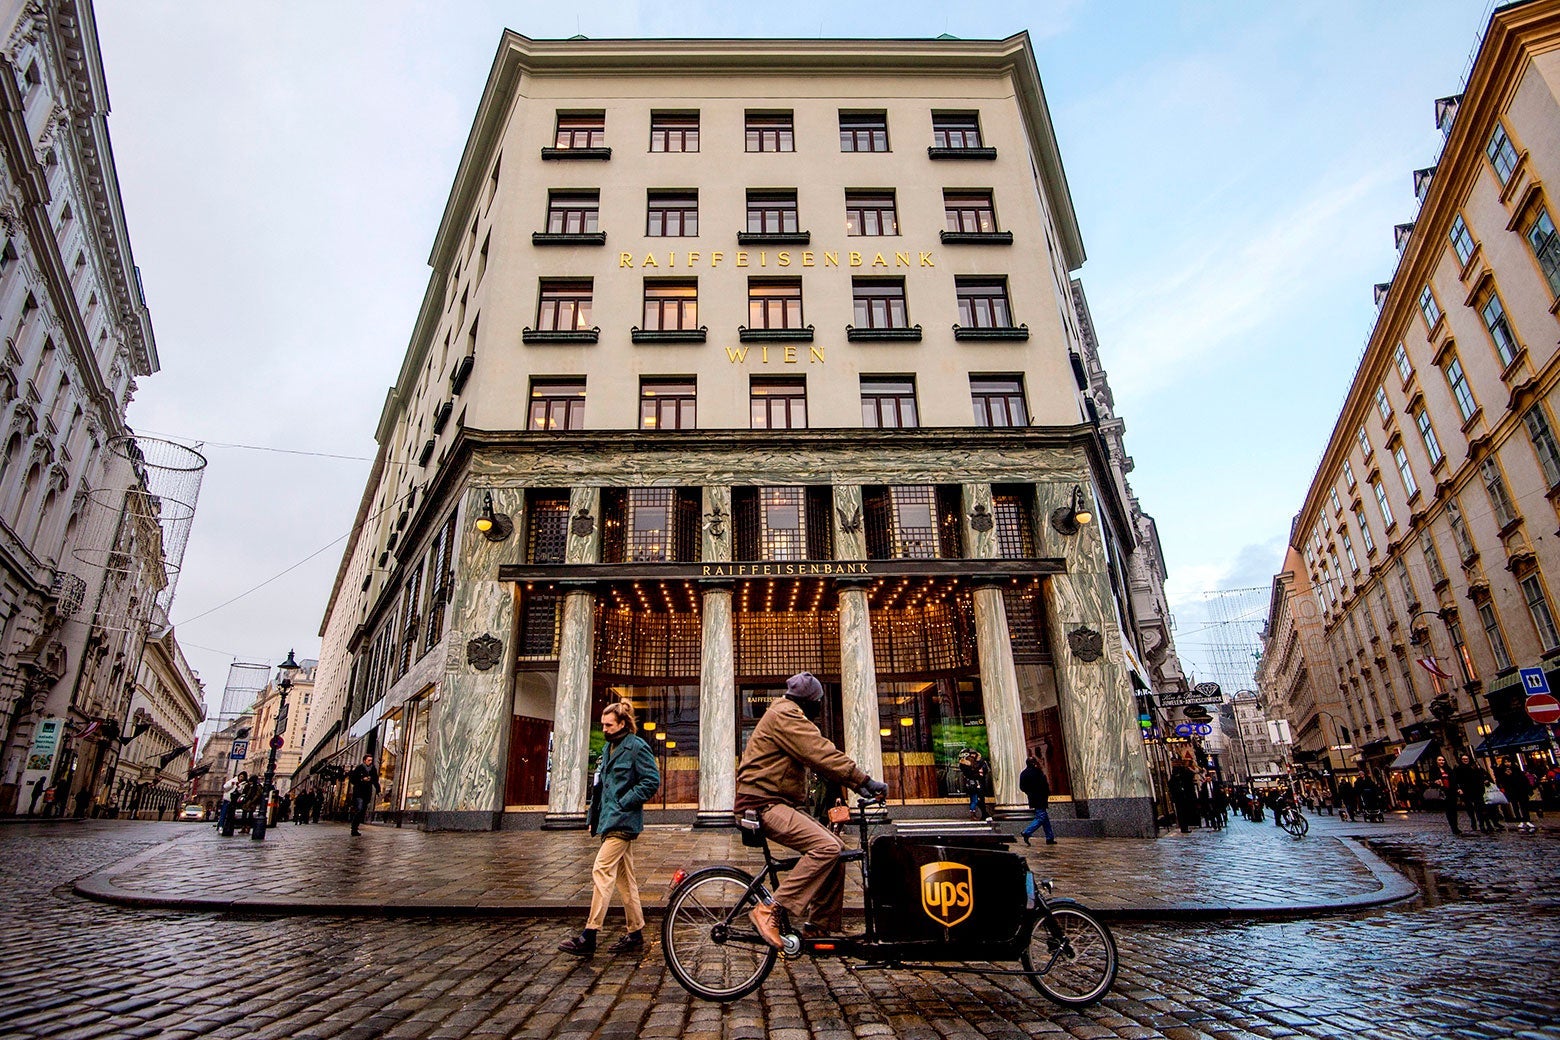 A UPS biker rides their bike in the street in front of the Looshaus.